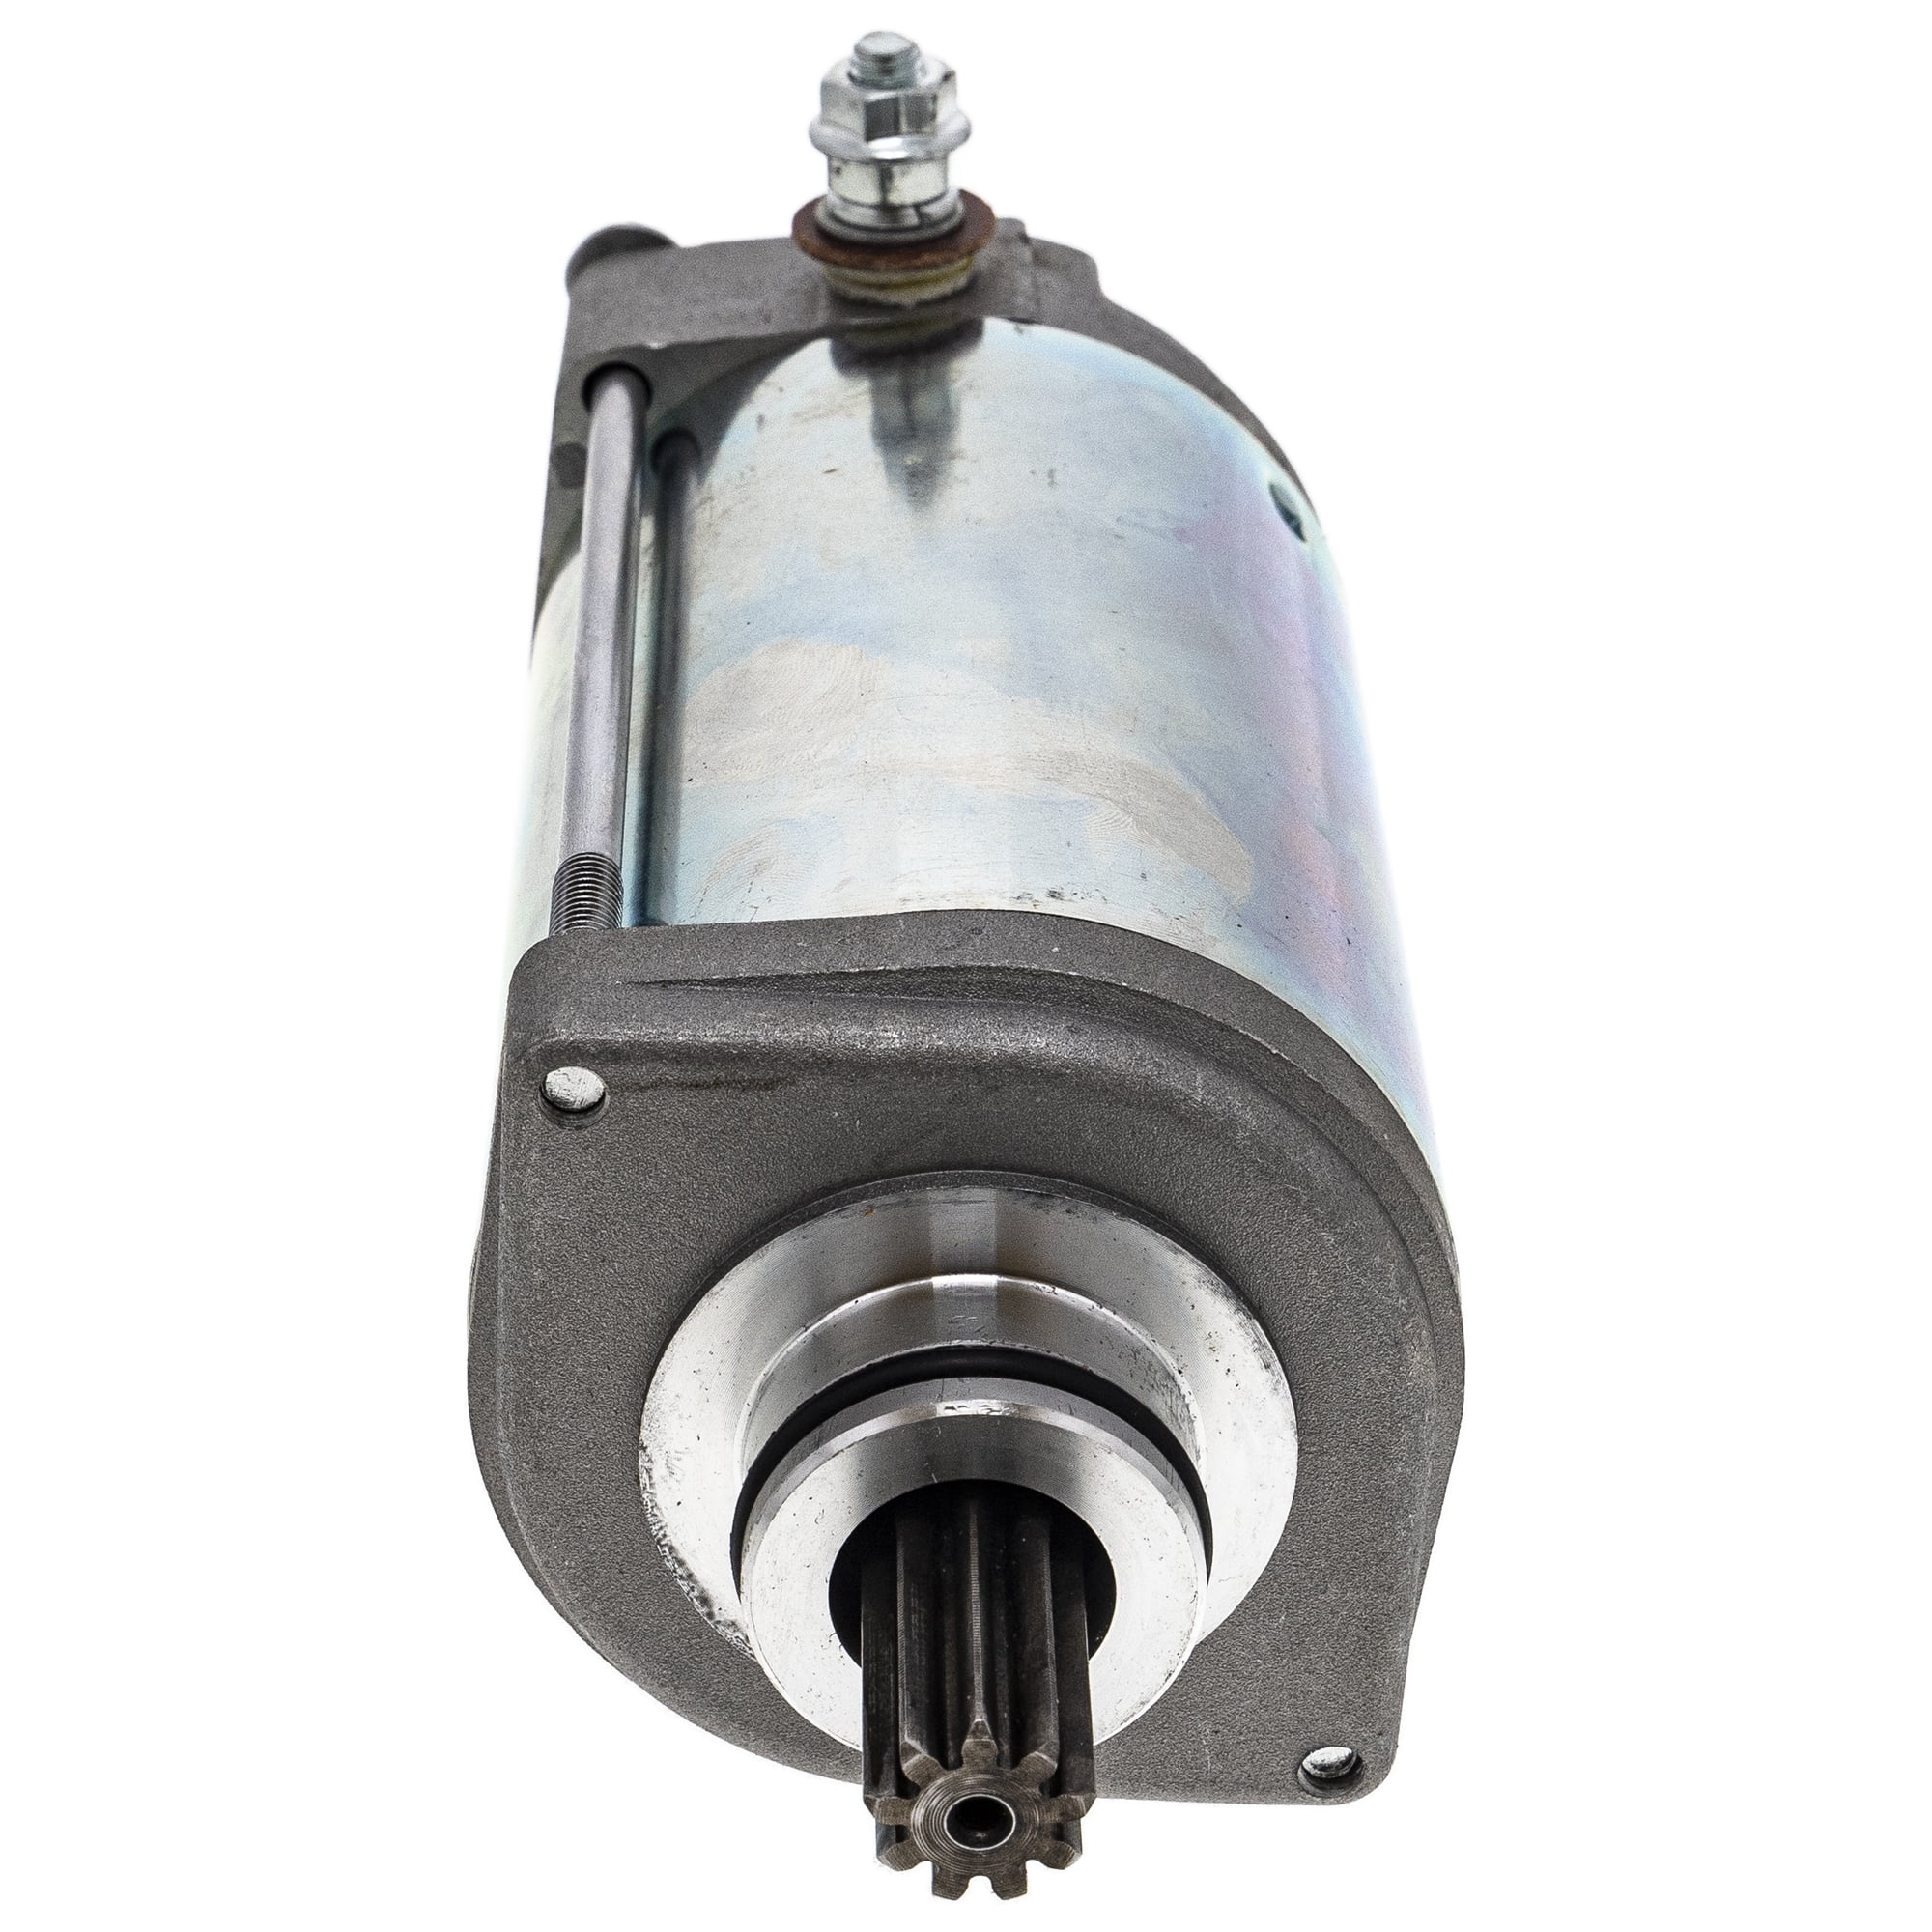 Niche Starter Motor for Can-Am Spyder 990 420685965 Motorcycle 519-CSM2385O